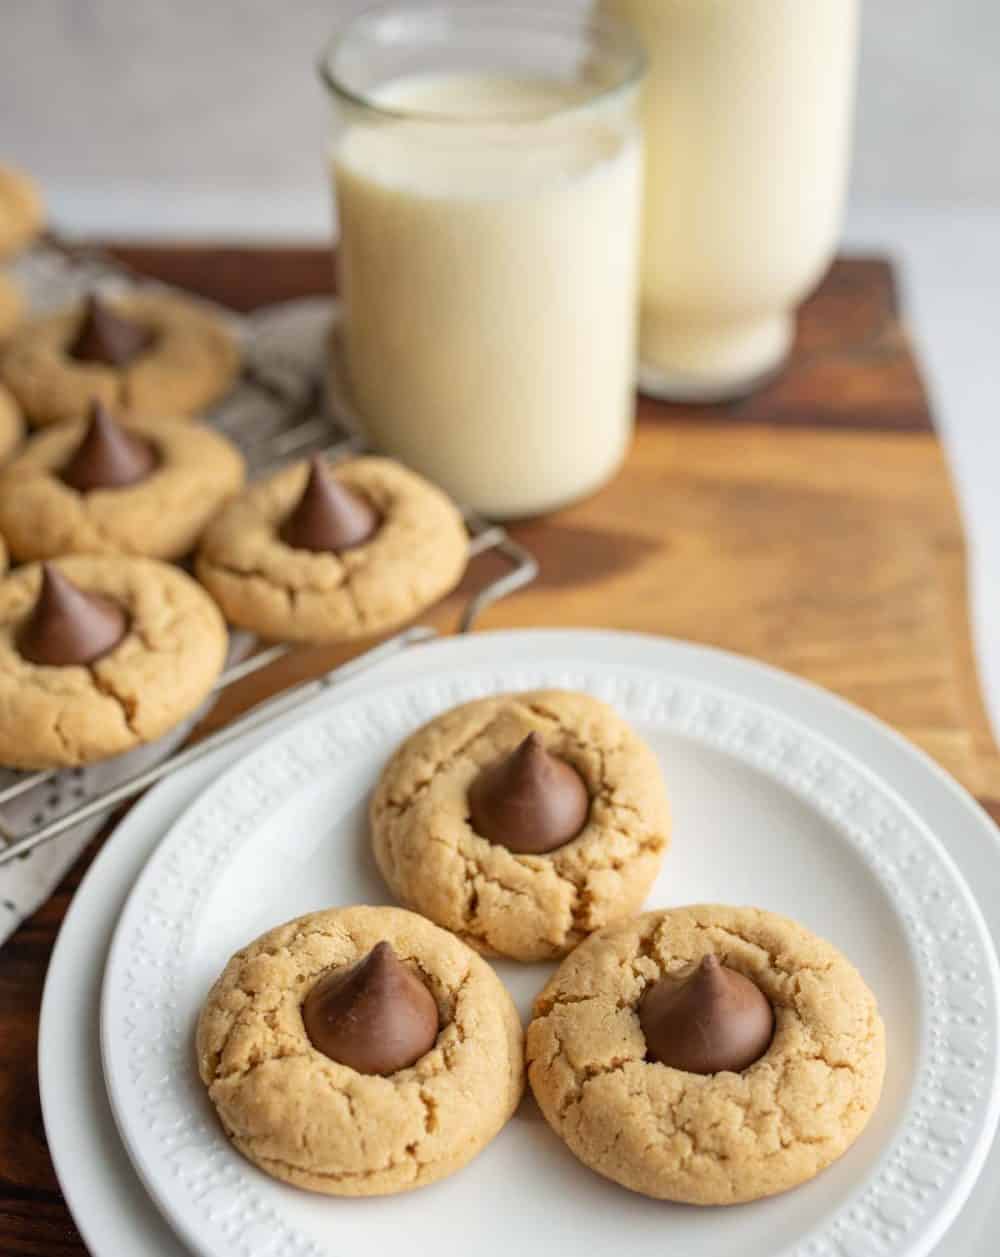 https://www.blessthismessplease.com/wp-content/uploads/2023/07/hershey-kiss-cookies-3-of-5.jpg